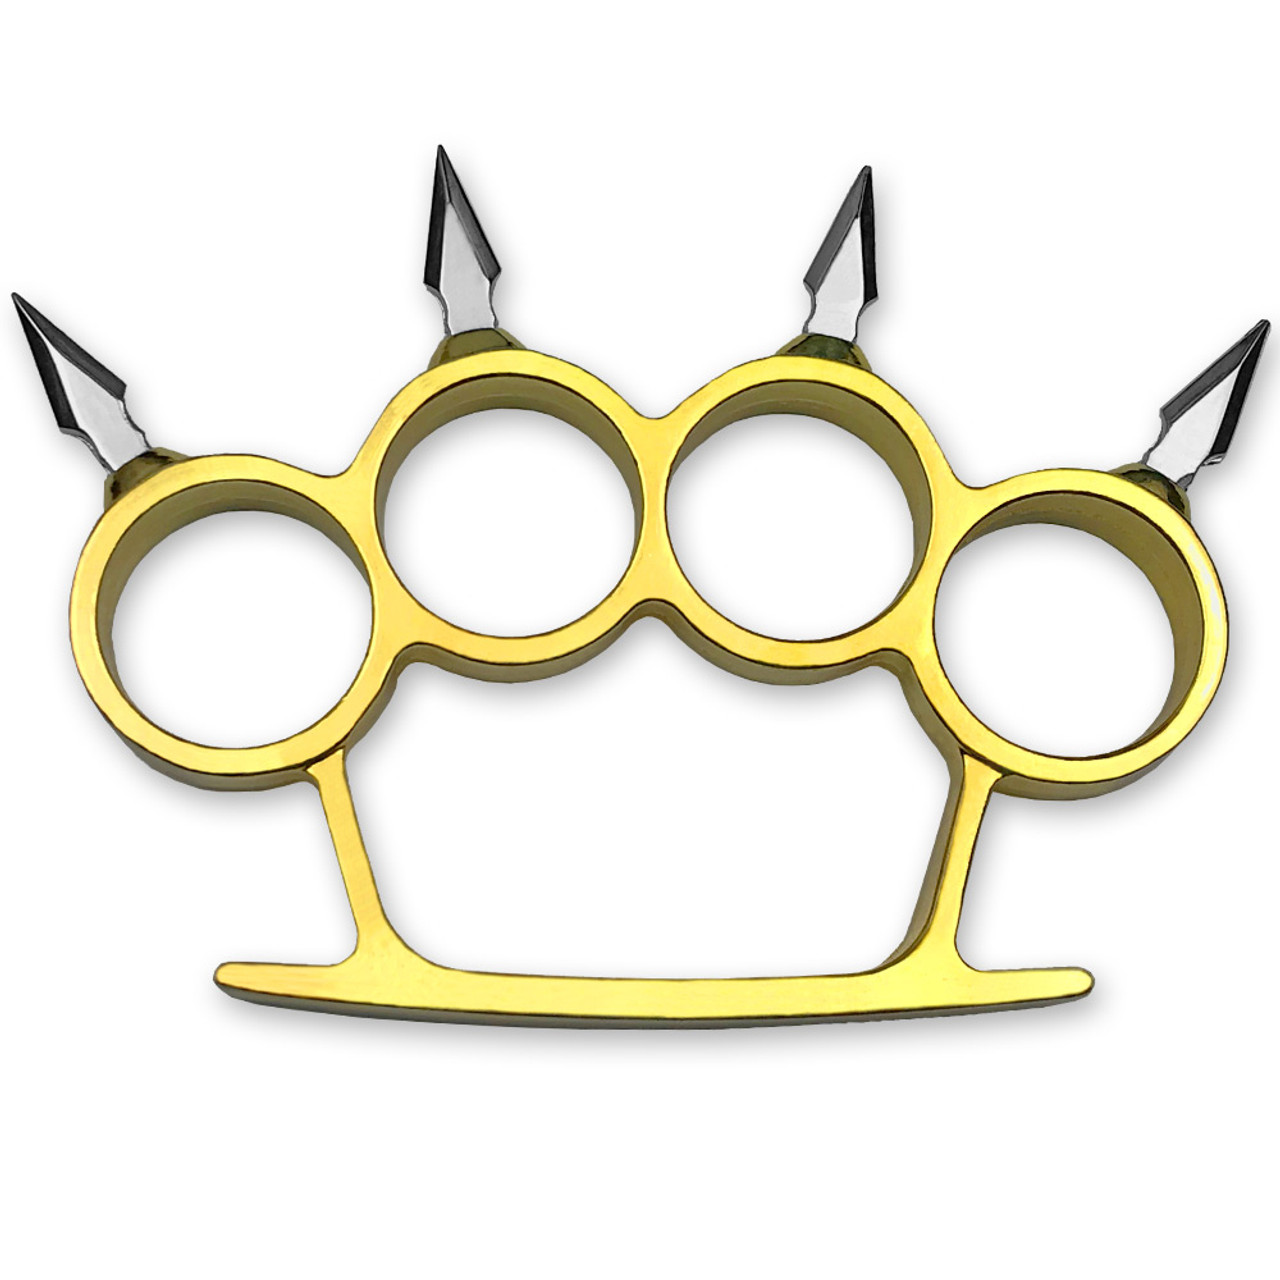 How much would brass knuckles really help in a fight? : r